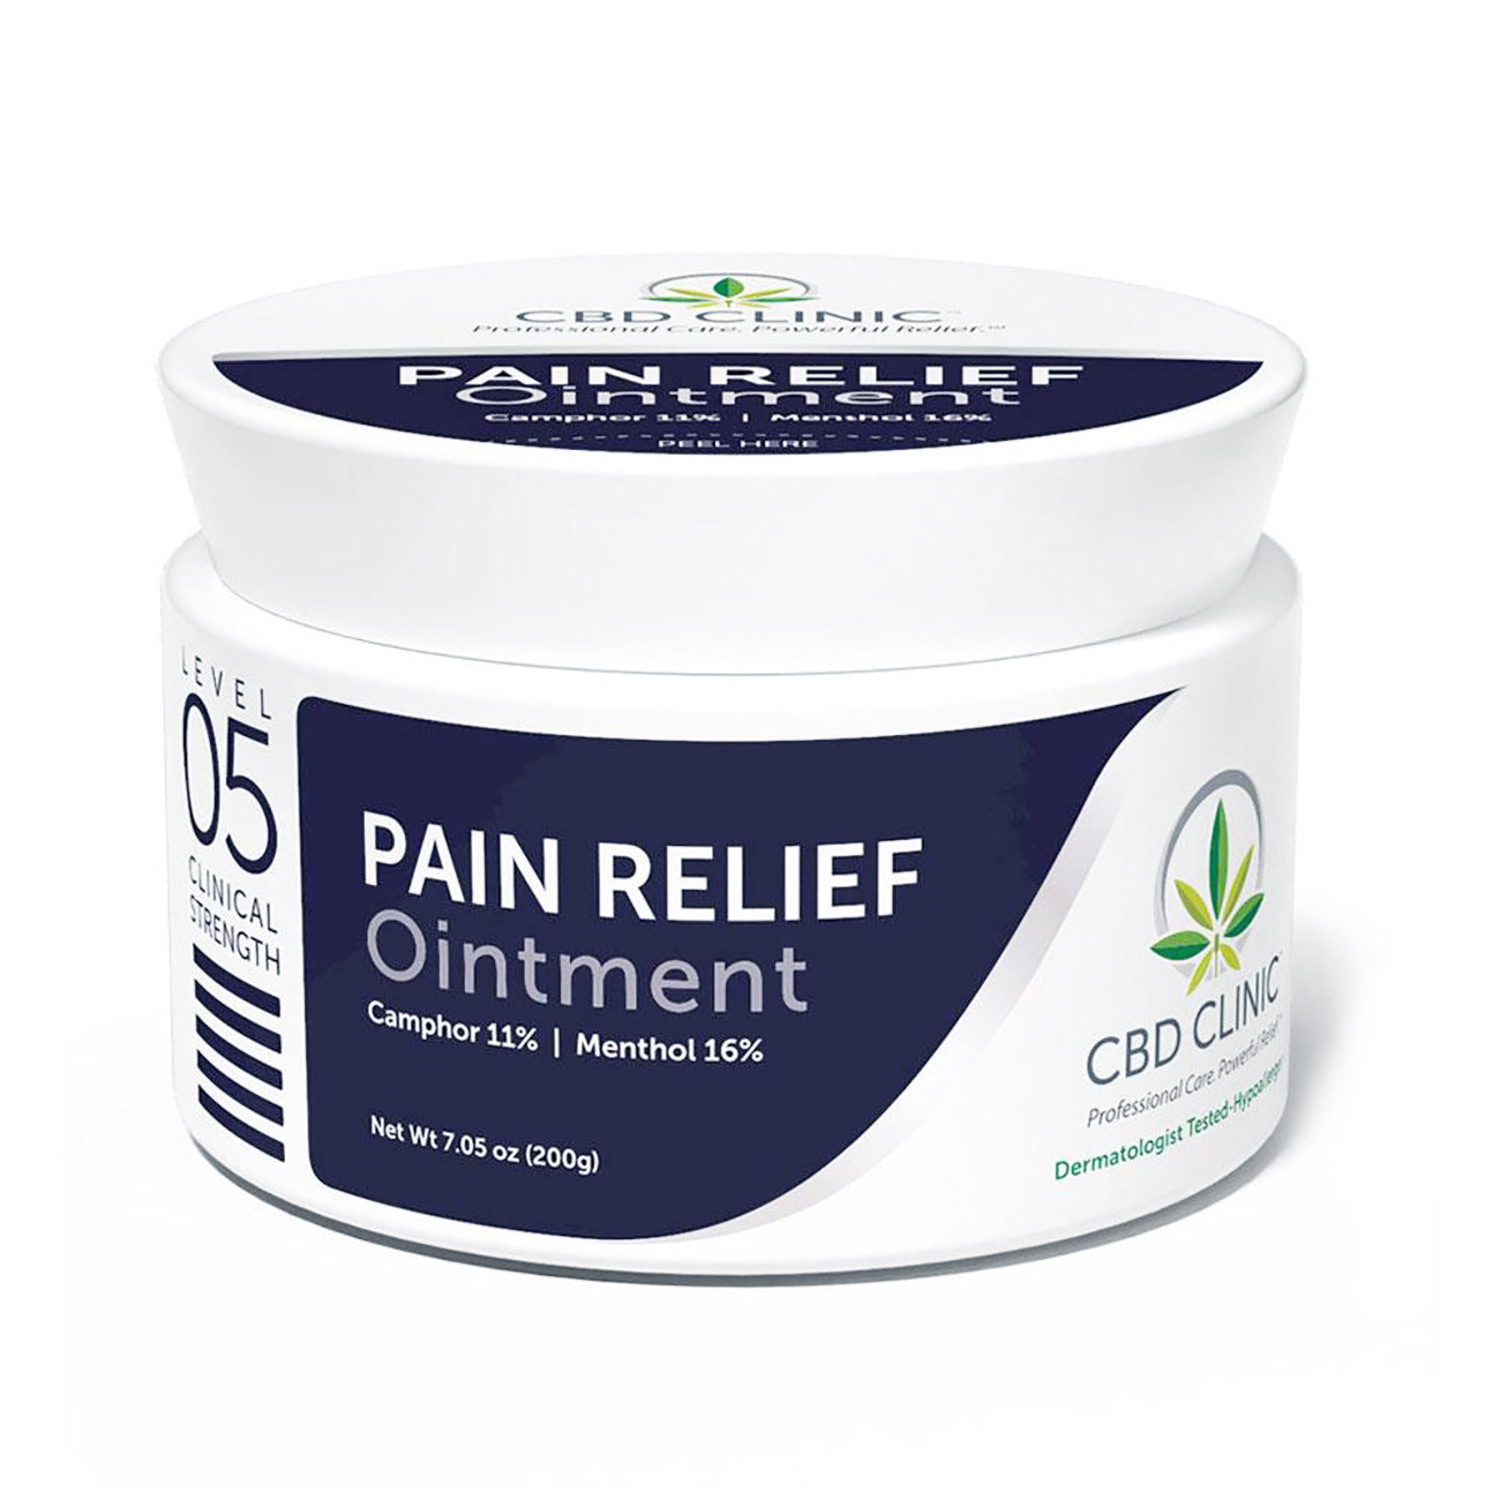 200 gram tub of CBD Clinic Level 5 Pain Relief Ointment